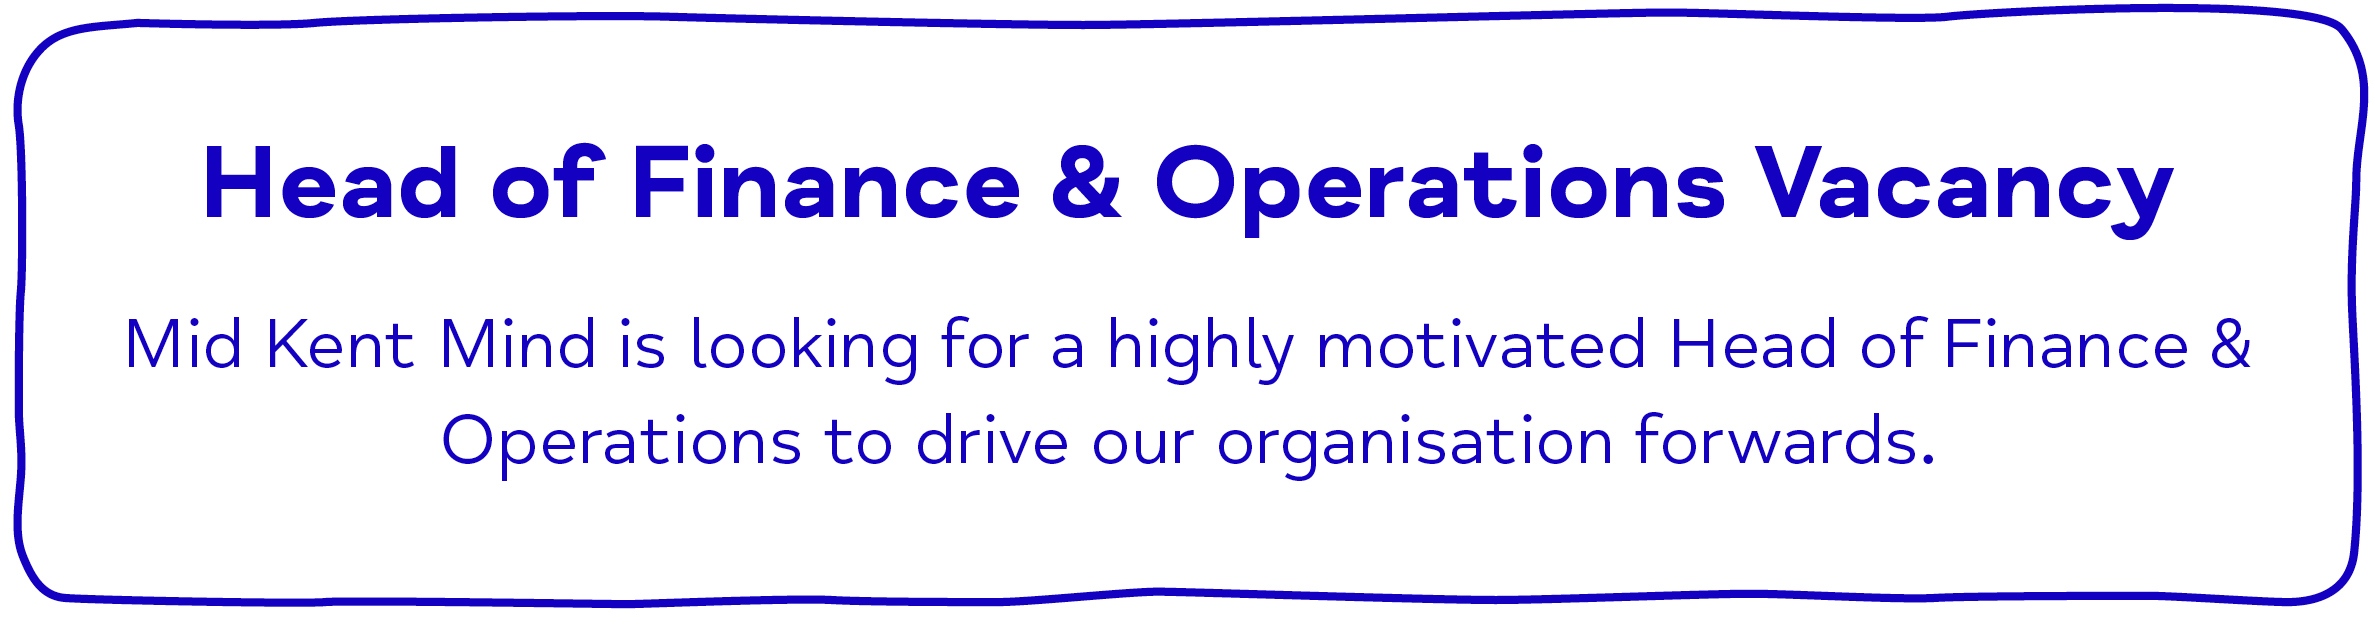 Finance & Operations. Mid Kent Mind is looking for a highly motivated Head of Finance & Operations to drive our organisation forwards.